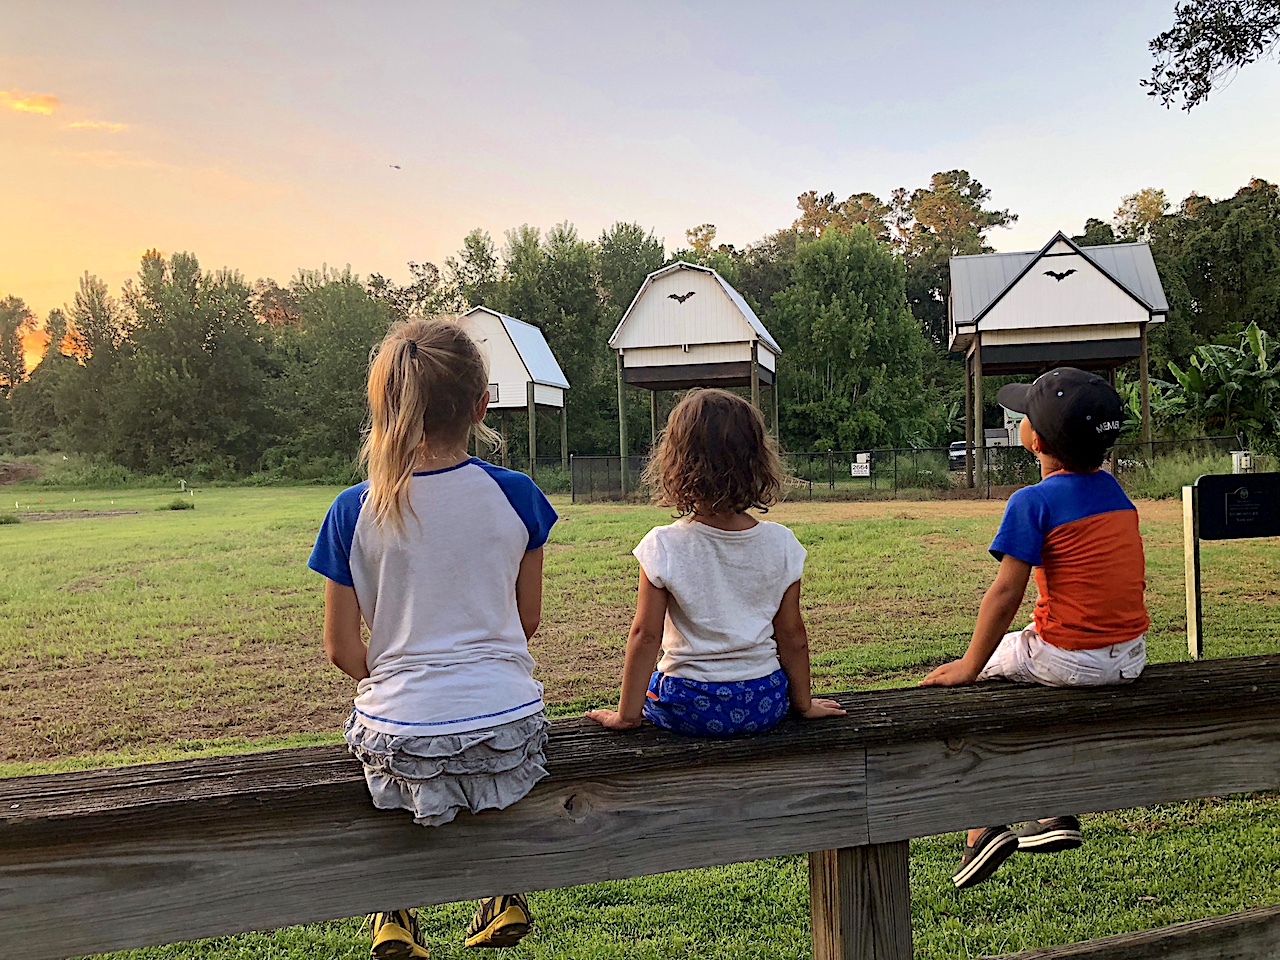 UF Bat Houses with Kids - 2-day itinerary for families in Gainesville, FL #gainesville #florida #tourofflorida #alachuacounty #gainesvilleFL #universityofflorida #UF #gogators #Gainesvillewithkids #gainesvilleitinerary